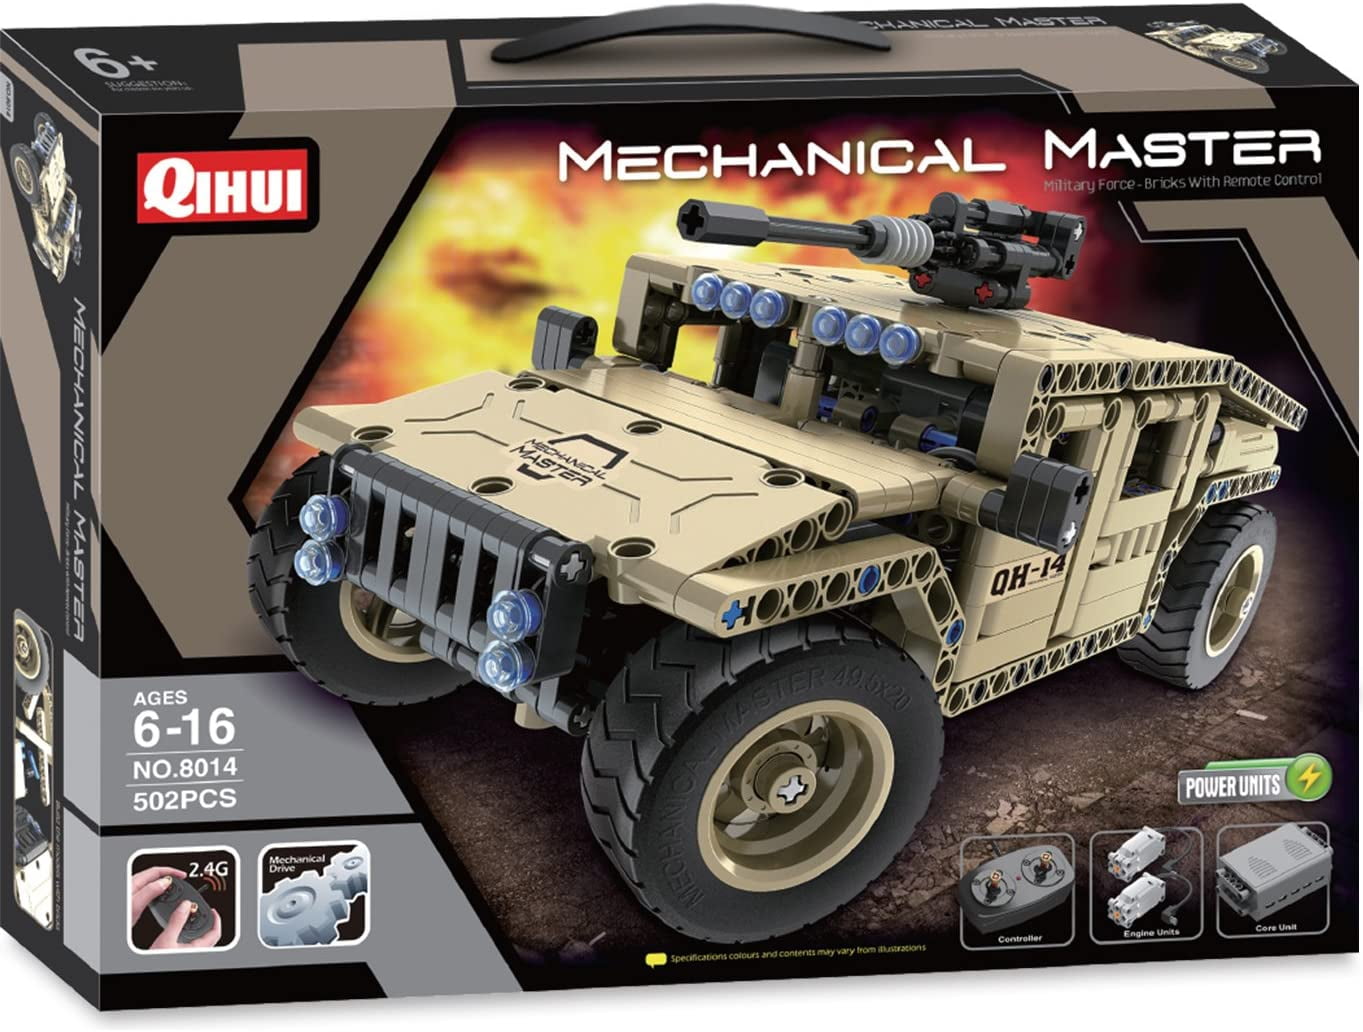 Qihui Mechanical Master Puzzle RC Armed Off-Road Vehicle Military force NEW 